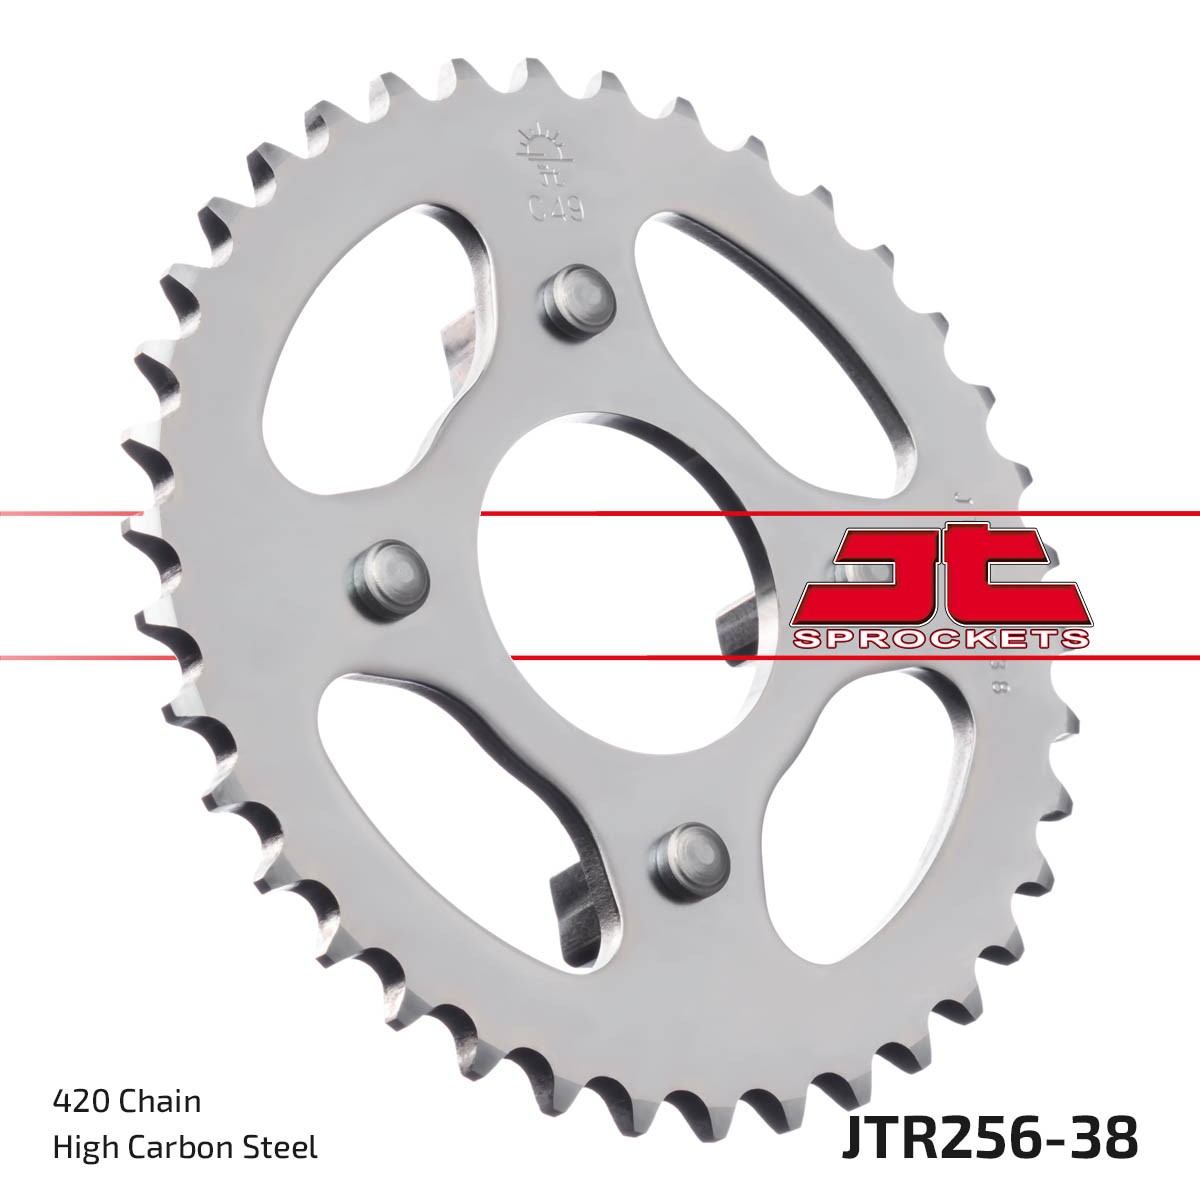 Chain Sprocket JTSPROCKETS JTR256.38 ZB Motorcycle Moped Maxi scooter